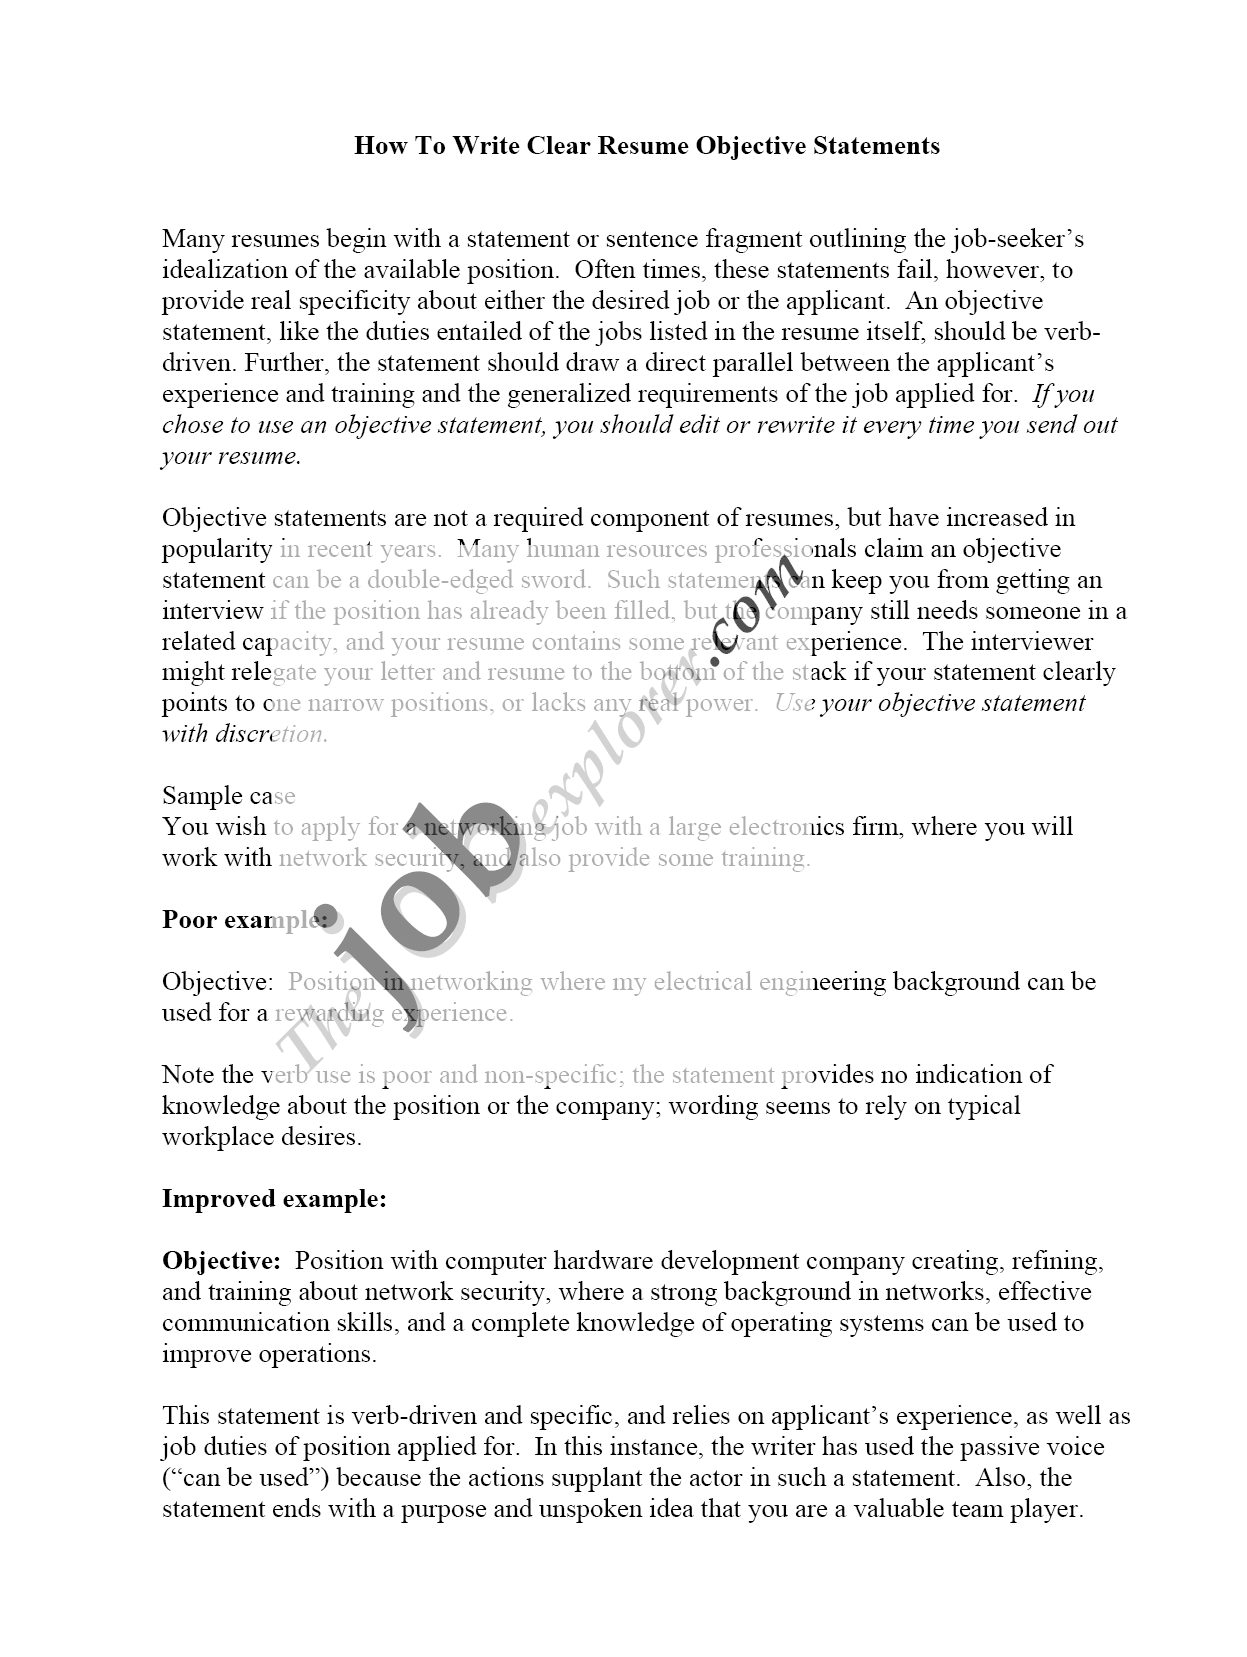 Tufts career services sample resume